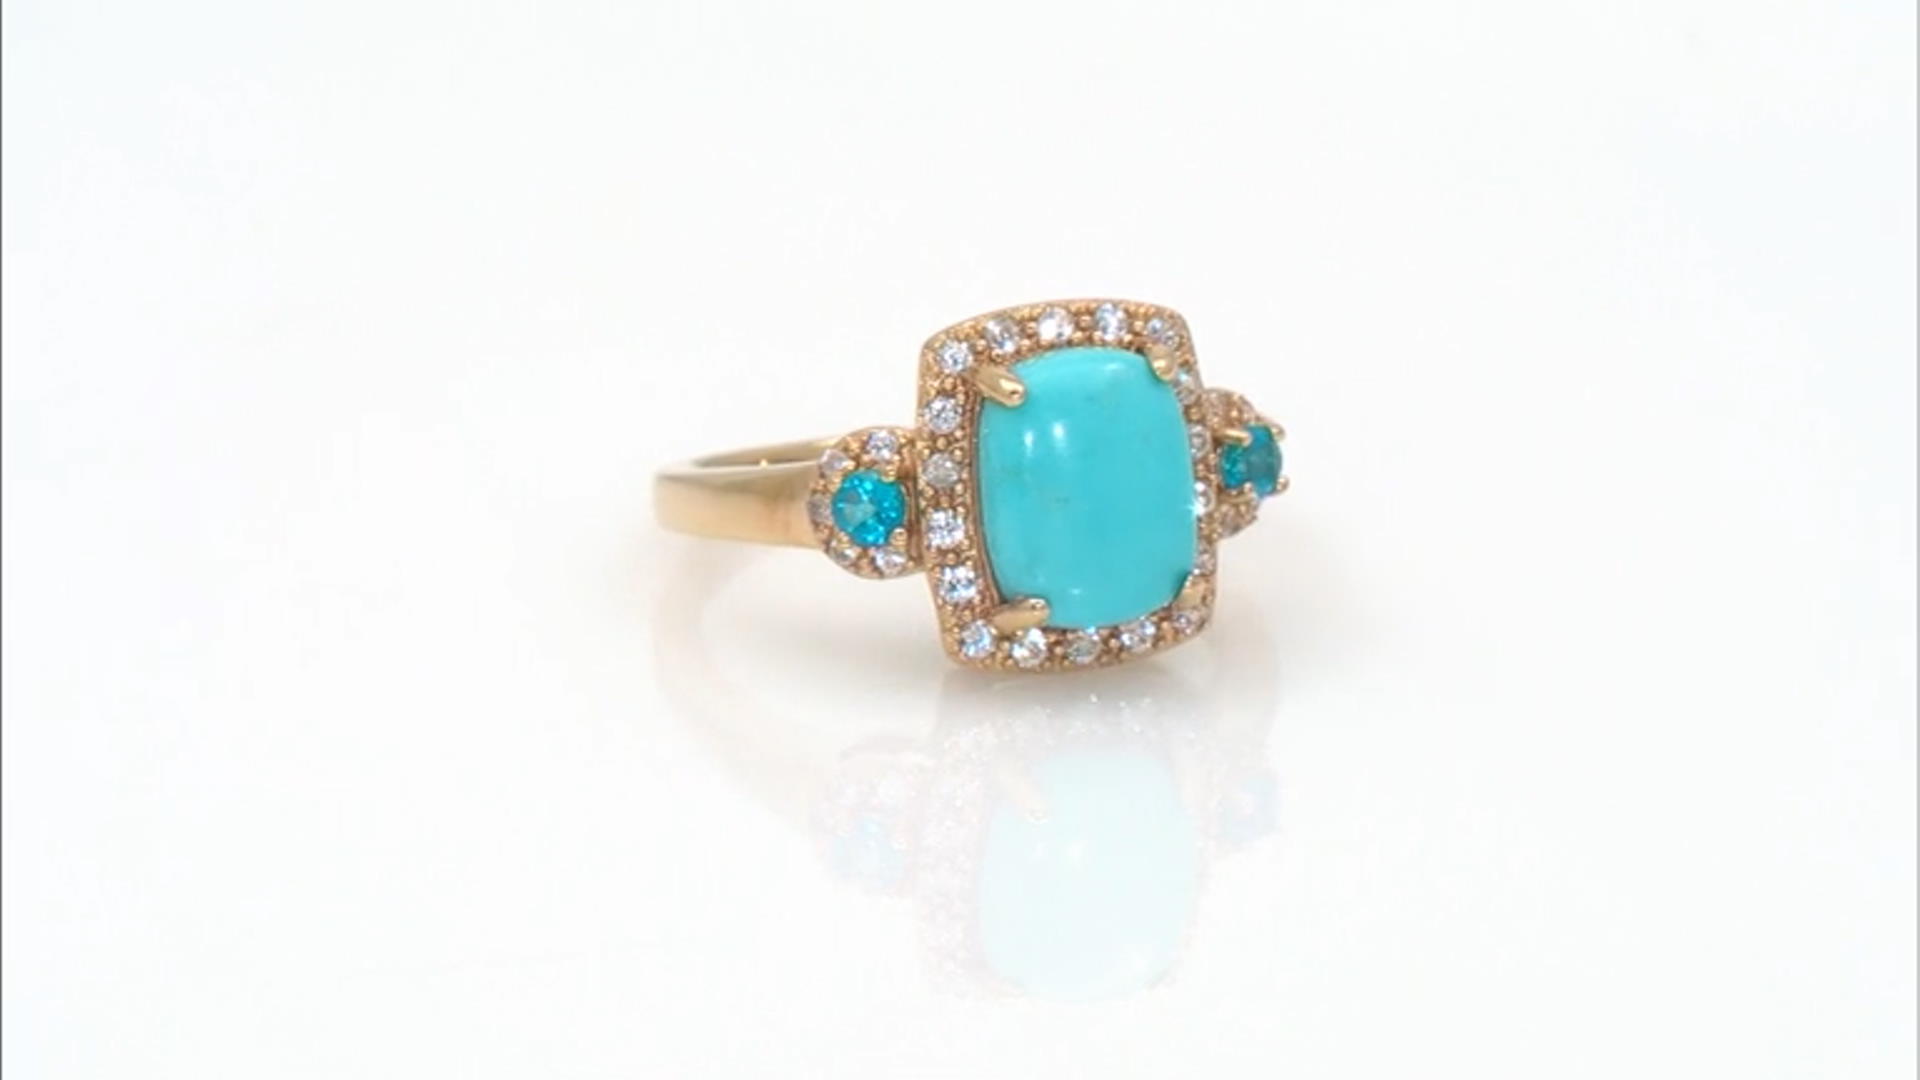 Sleeping Beauty Turquoise, Neon Apatite, White Zircon 18k Yellow Gold Over Silver Ring 0.28ctw Video Thumbnail